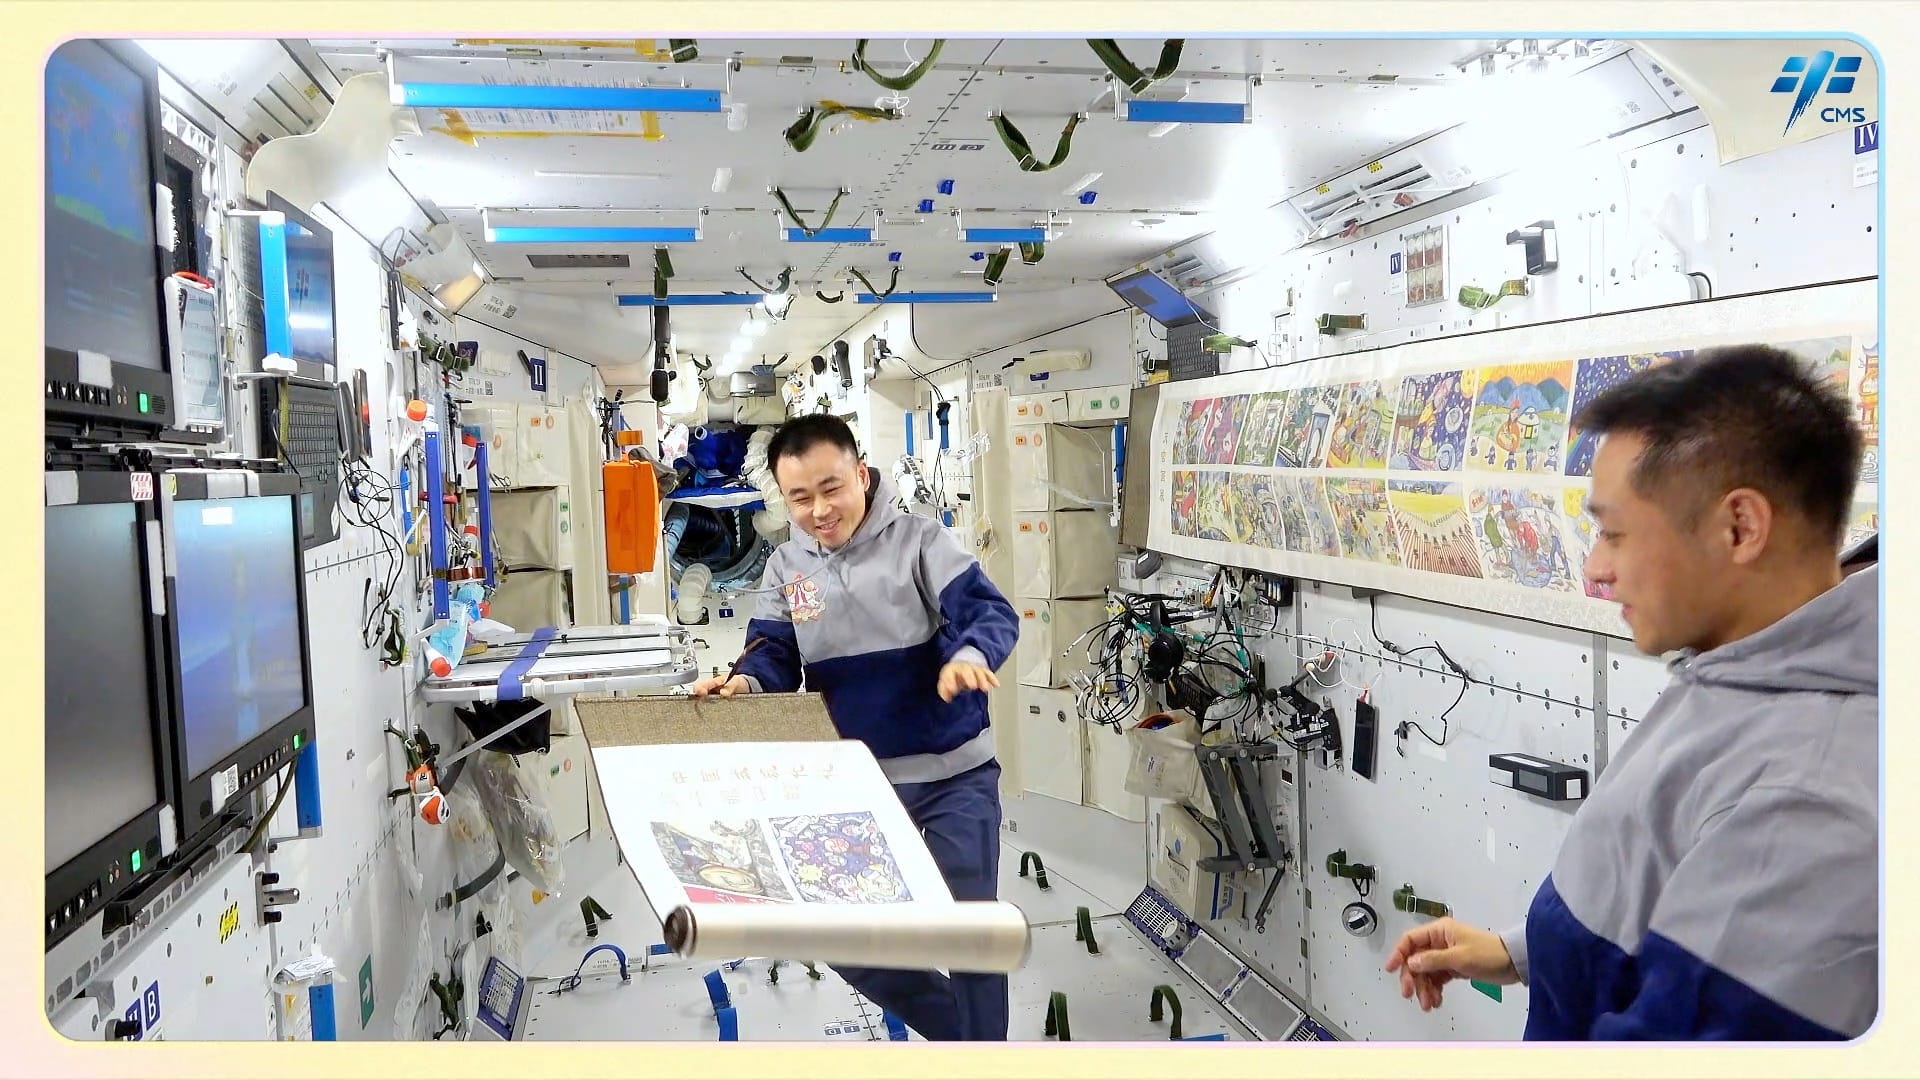 Tang Shengje (left) and Jiang Xinlin (right) aboard the Tiangong Space Station unrolling artwork for display during the Shenzhou 17 mission. ©China Manned Space Agency